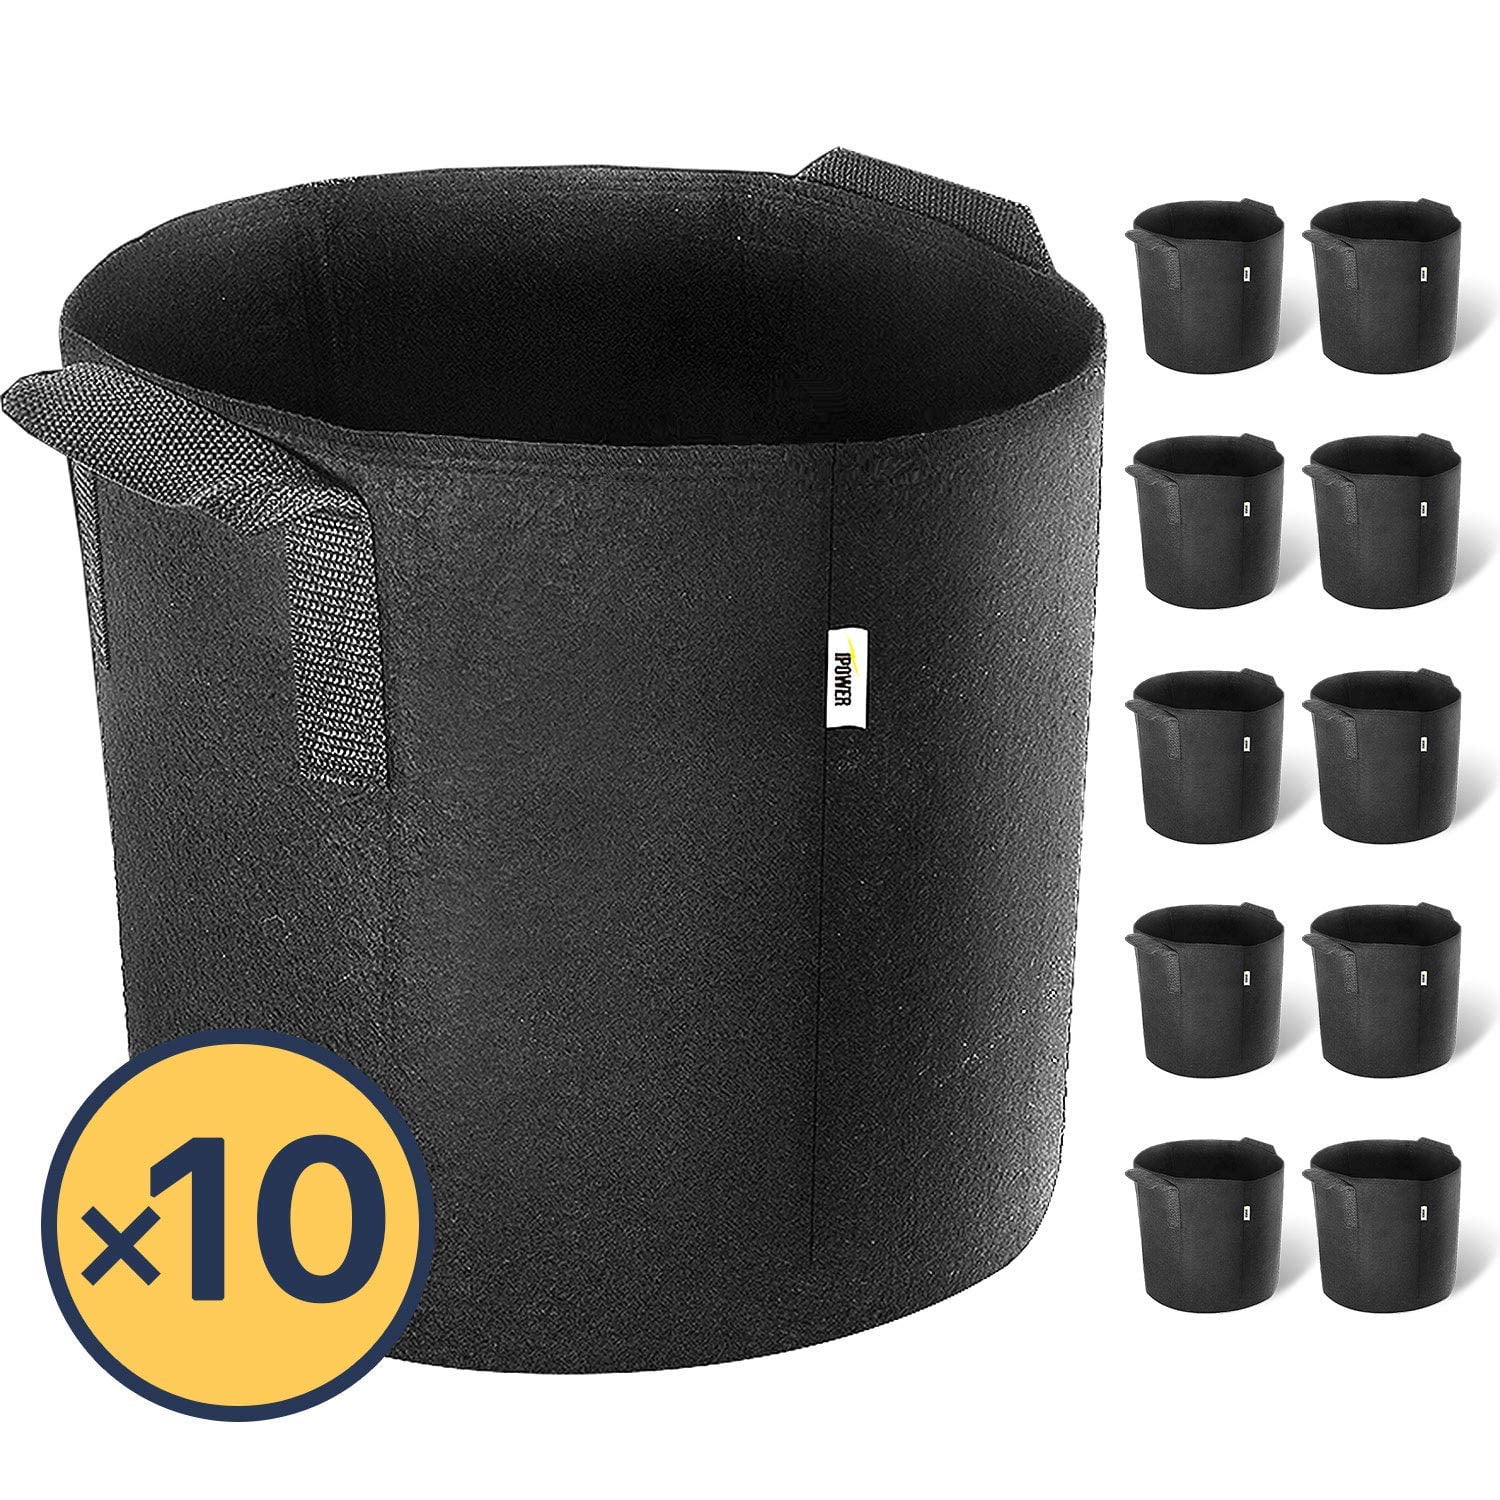 5Pack 3/7Gallon Grow Bags Black Fabric Pots Aeration Planter Gardening Container 